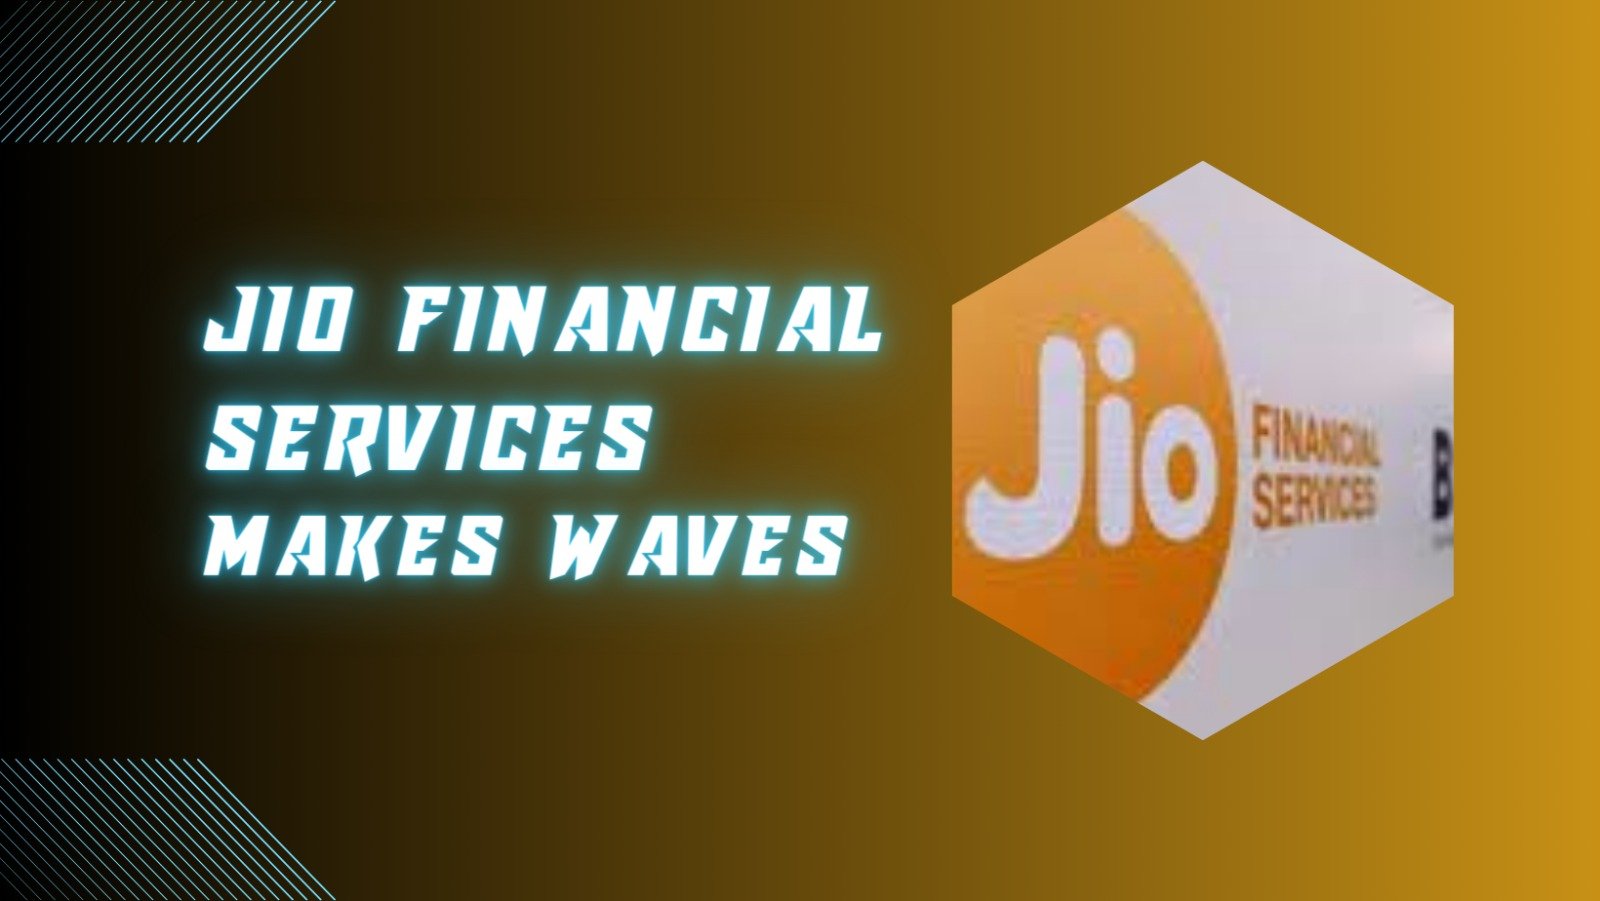 Ambani’s data-driven disruption strategy is gaining prominence in India’s finance sector, with Jio Financial Services making waves in this area